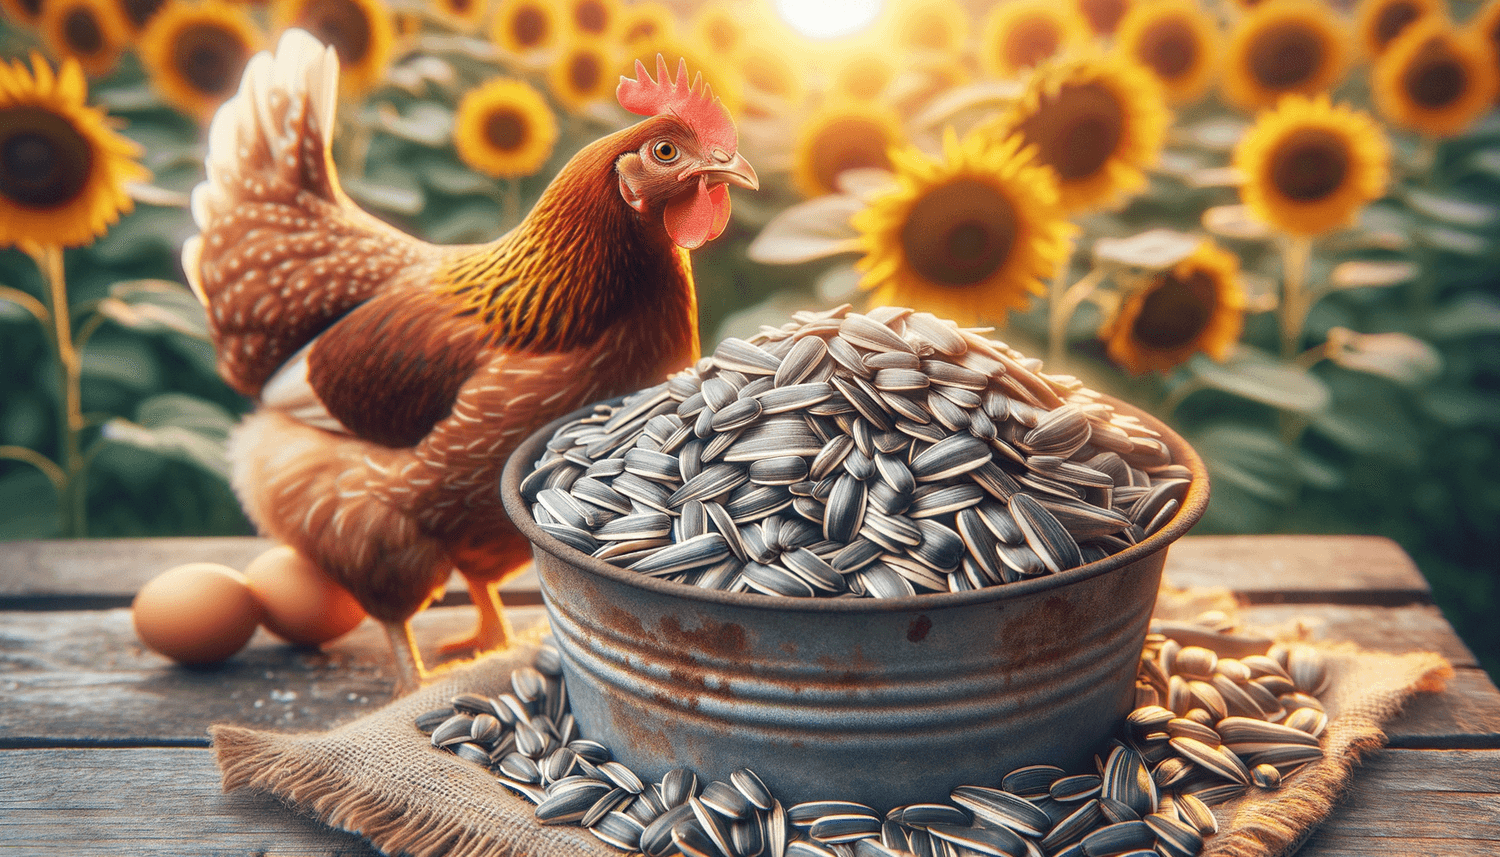 Can Chickens Eat Shelled Sunflower Seeds?